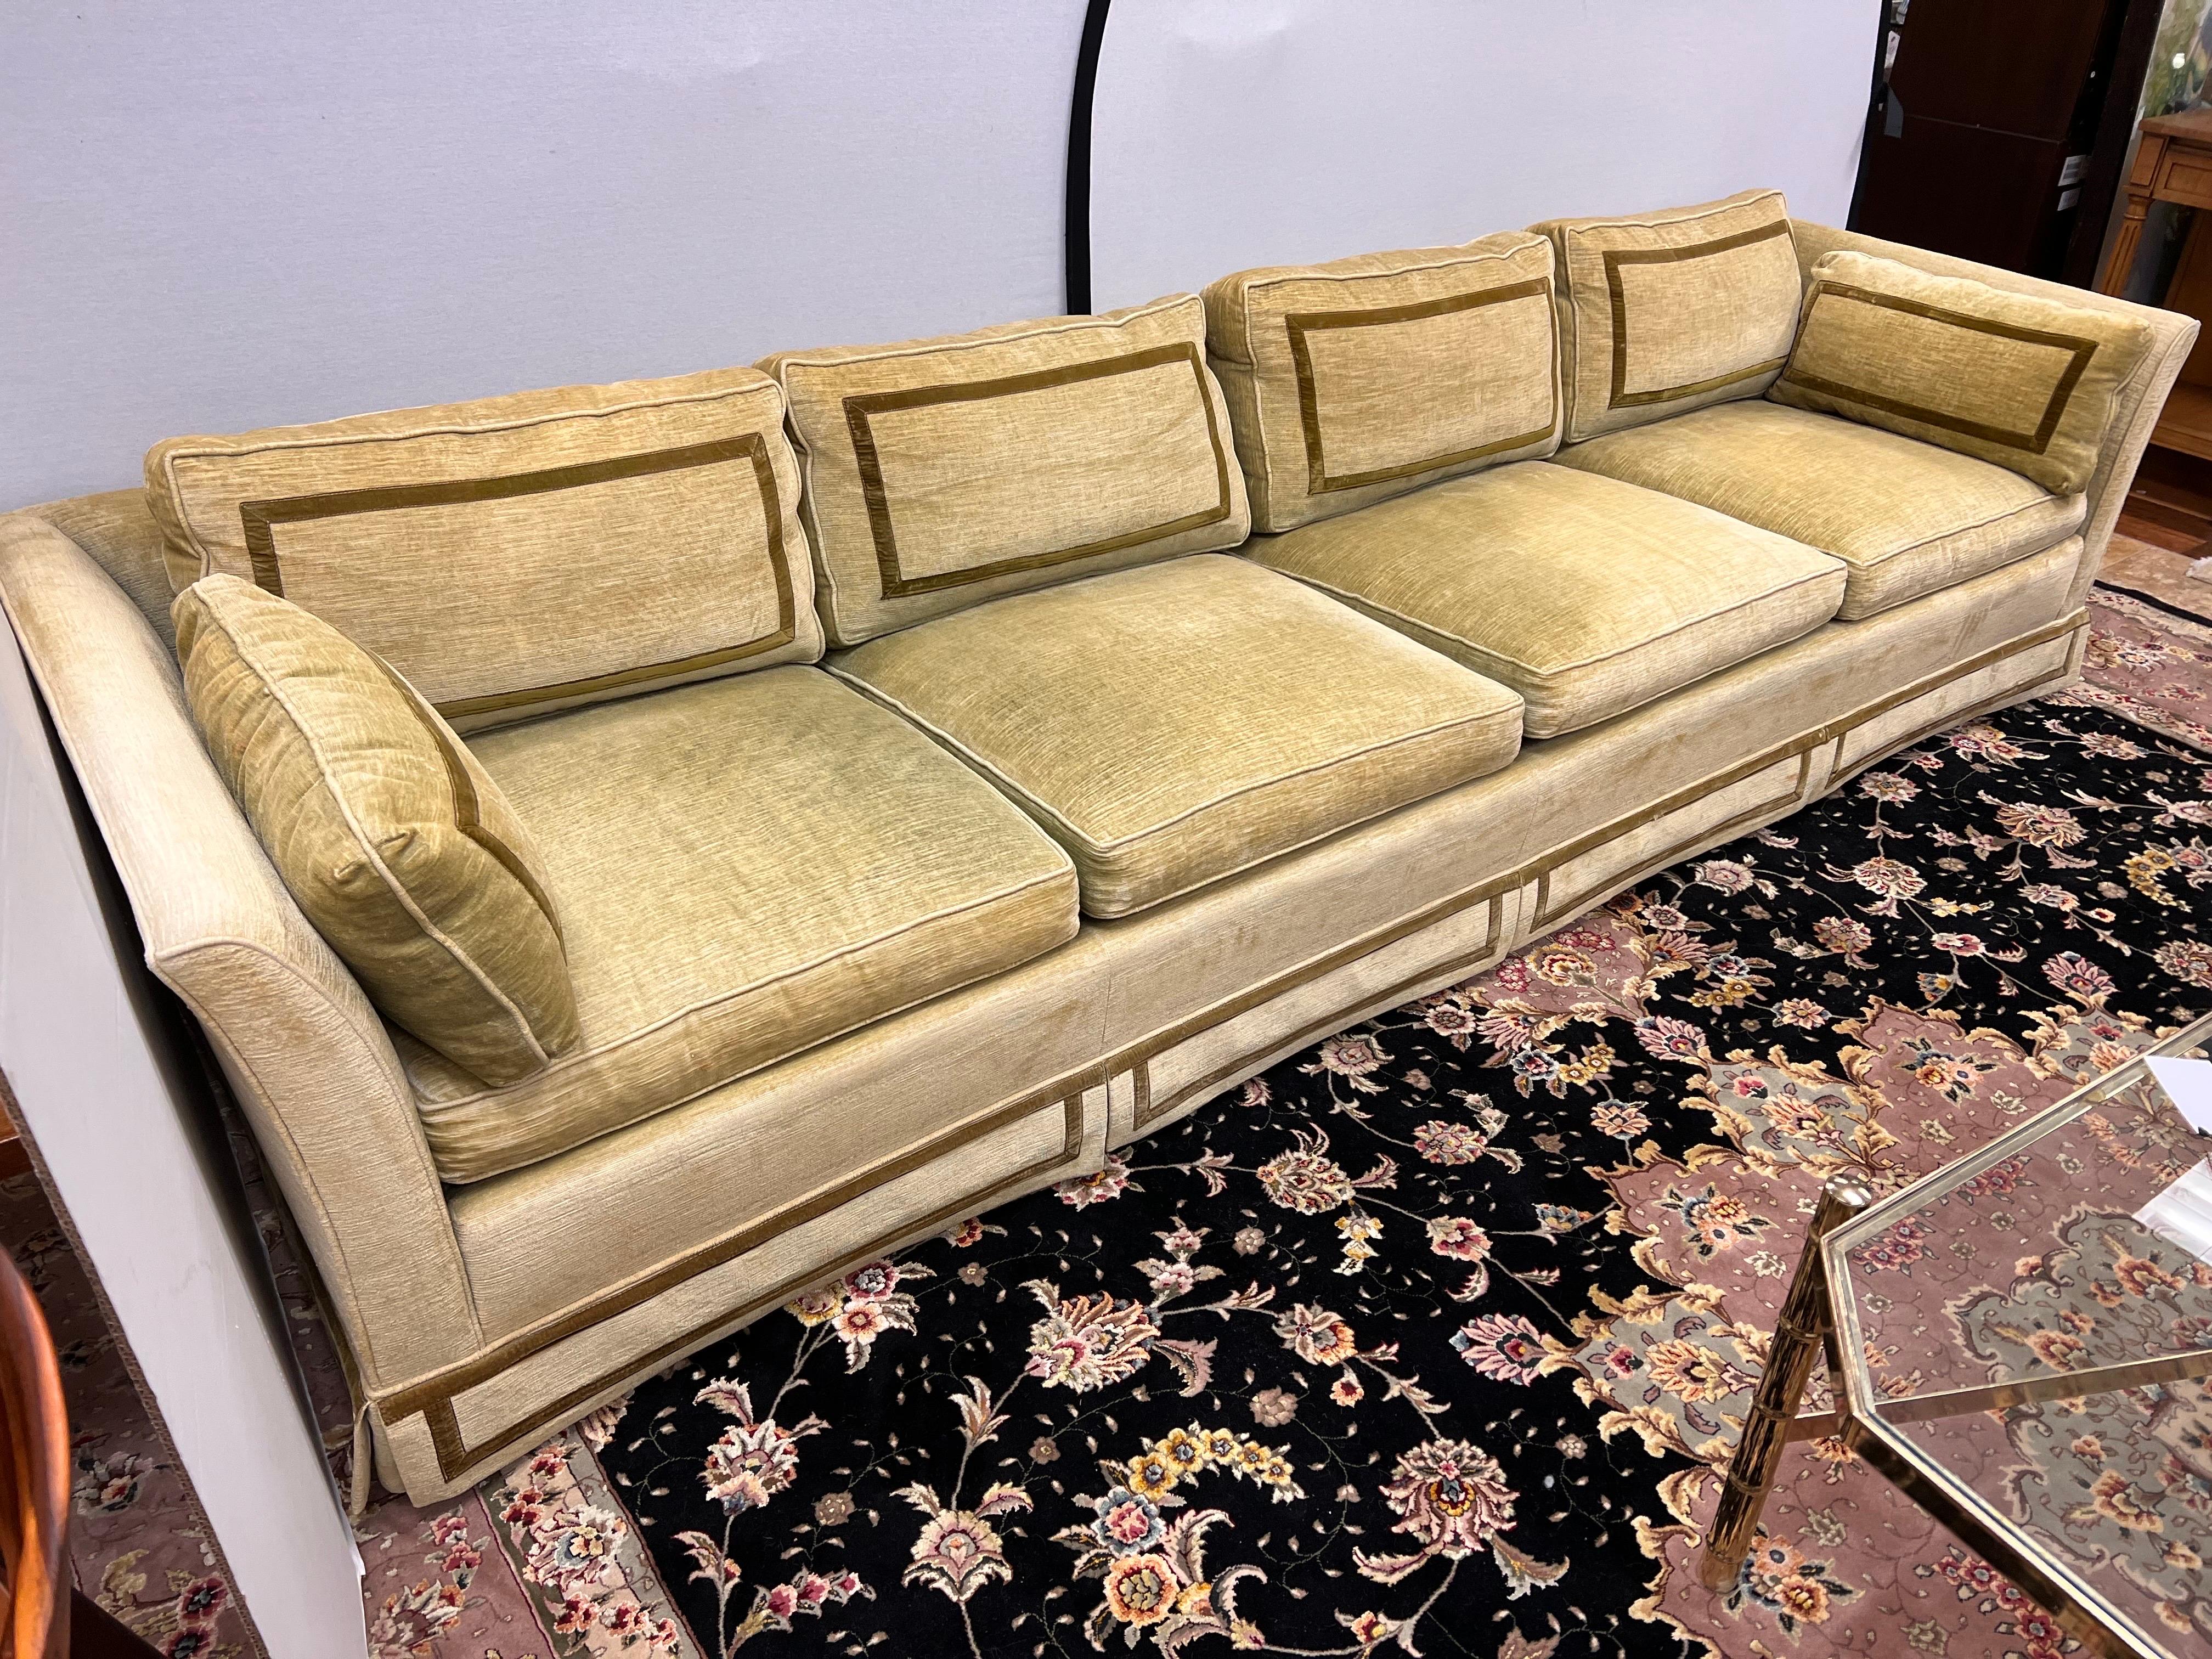 Stunning rare 9 ft signed vintage Erwin Lambeth sofa with original fabric. Although slightly faded from its age, this Erwin Lambeth sofa still retains its beauty after 50 plus years. The original fabric is a pretty light olive green velvet with